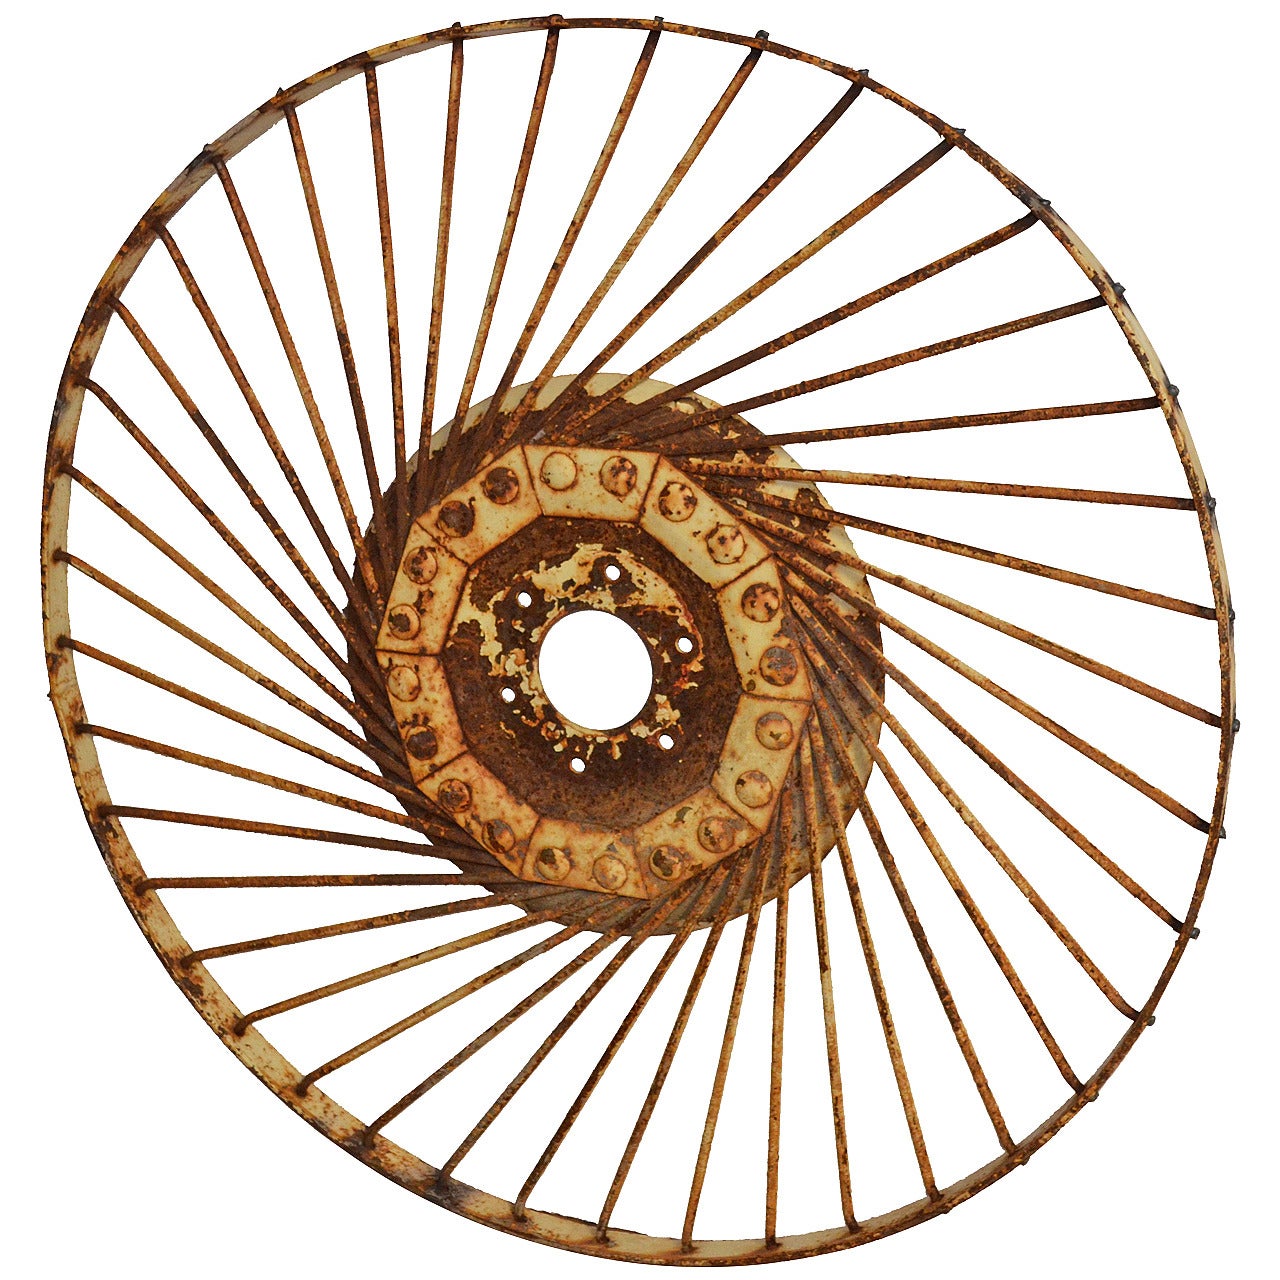 Wheel from Farm Implement